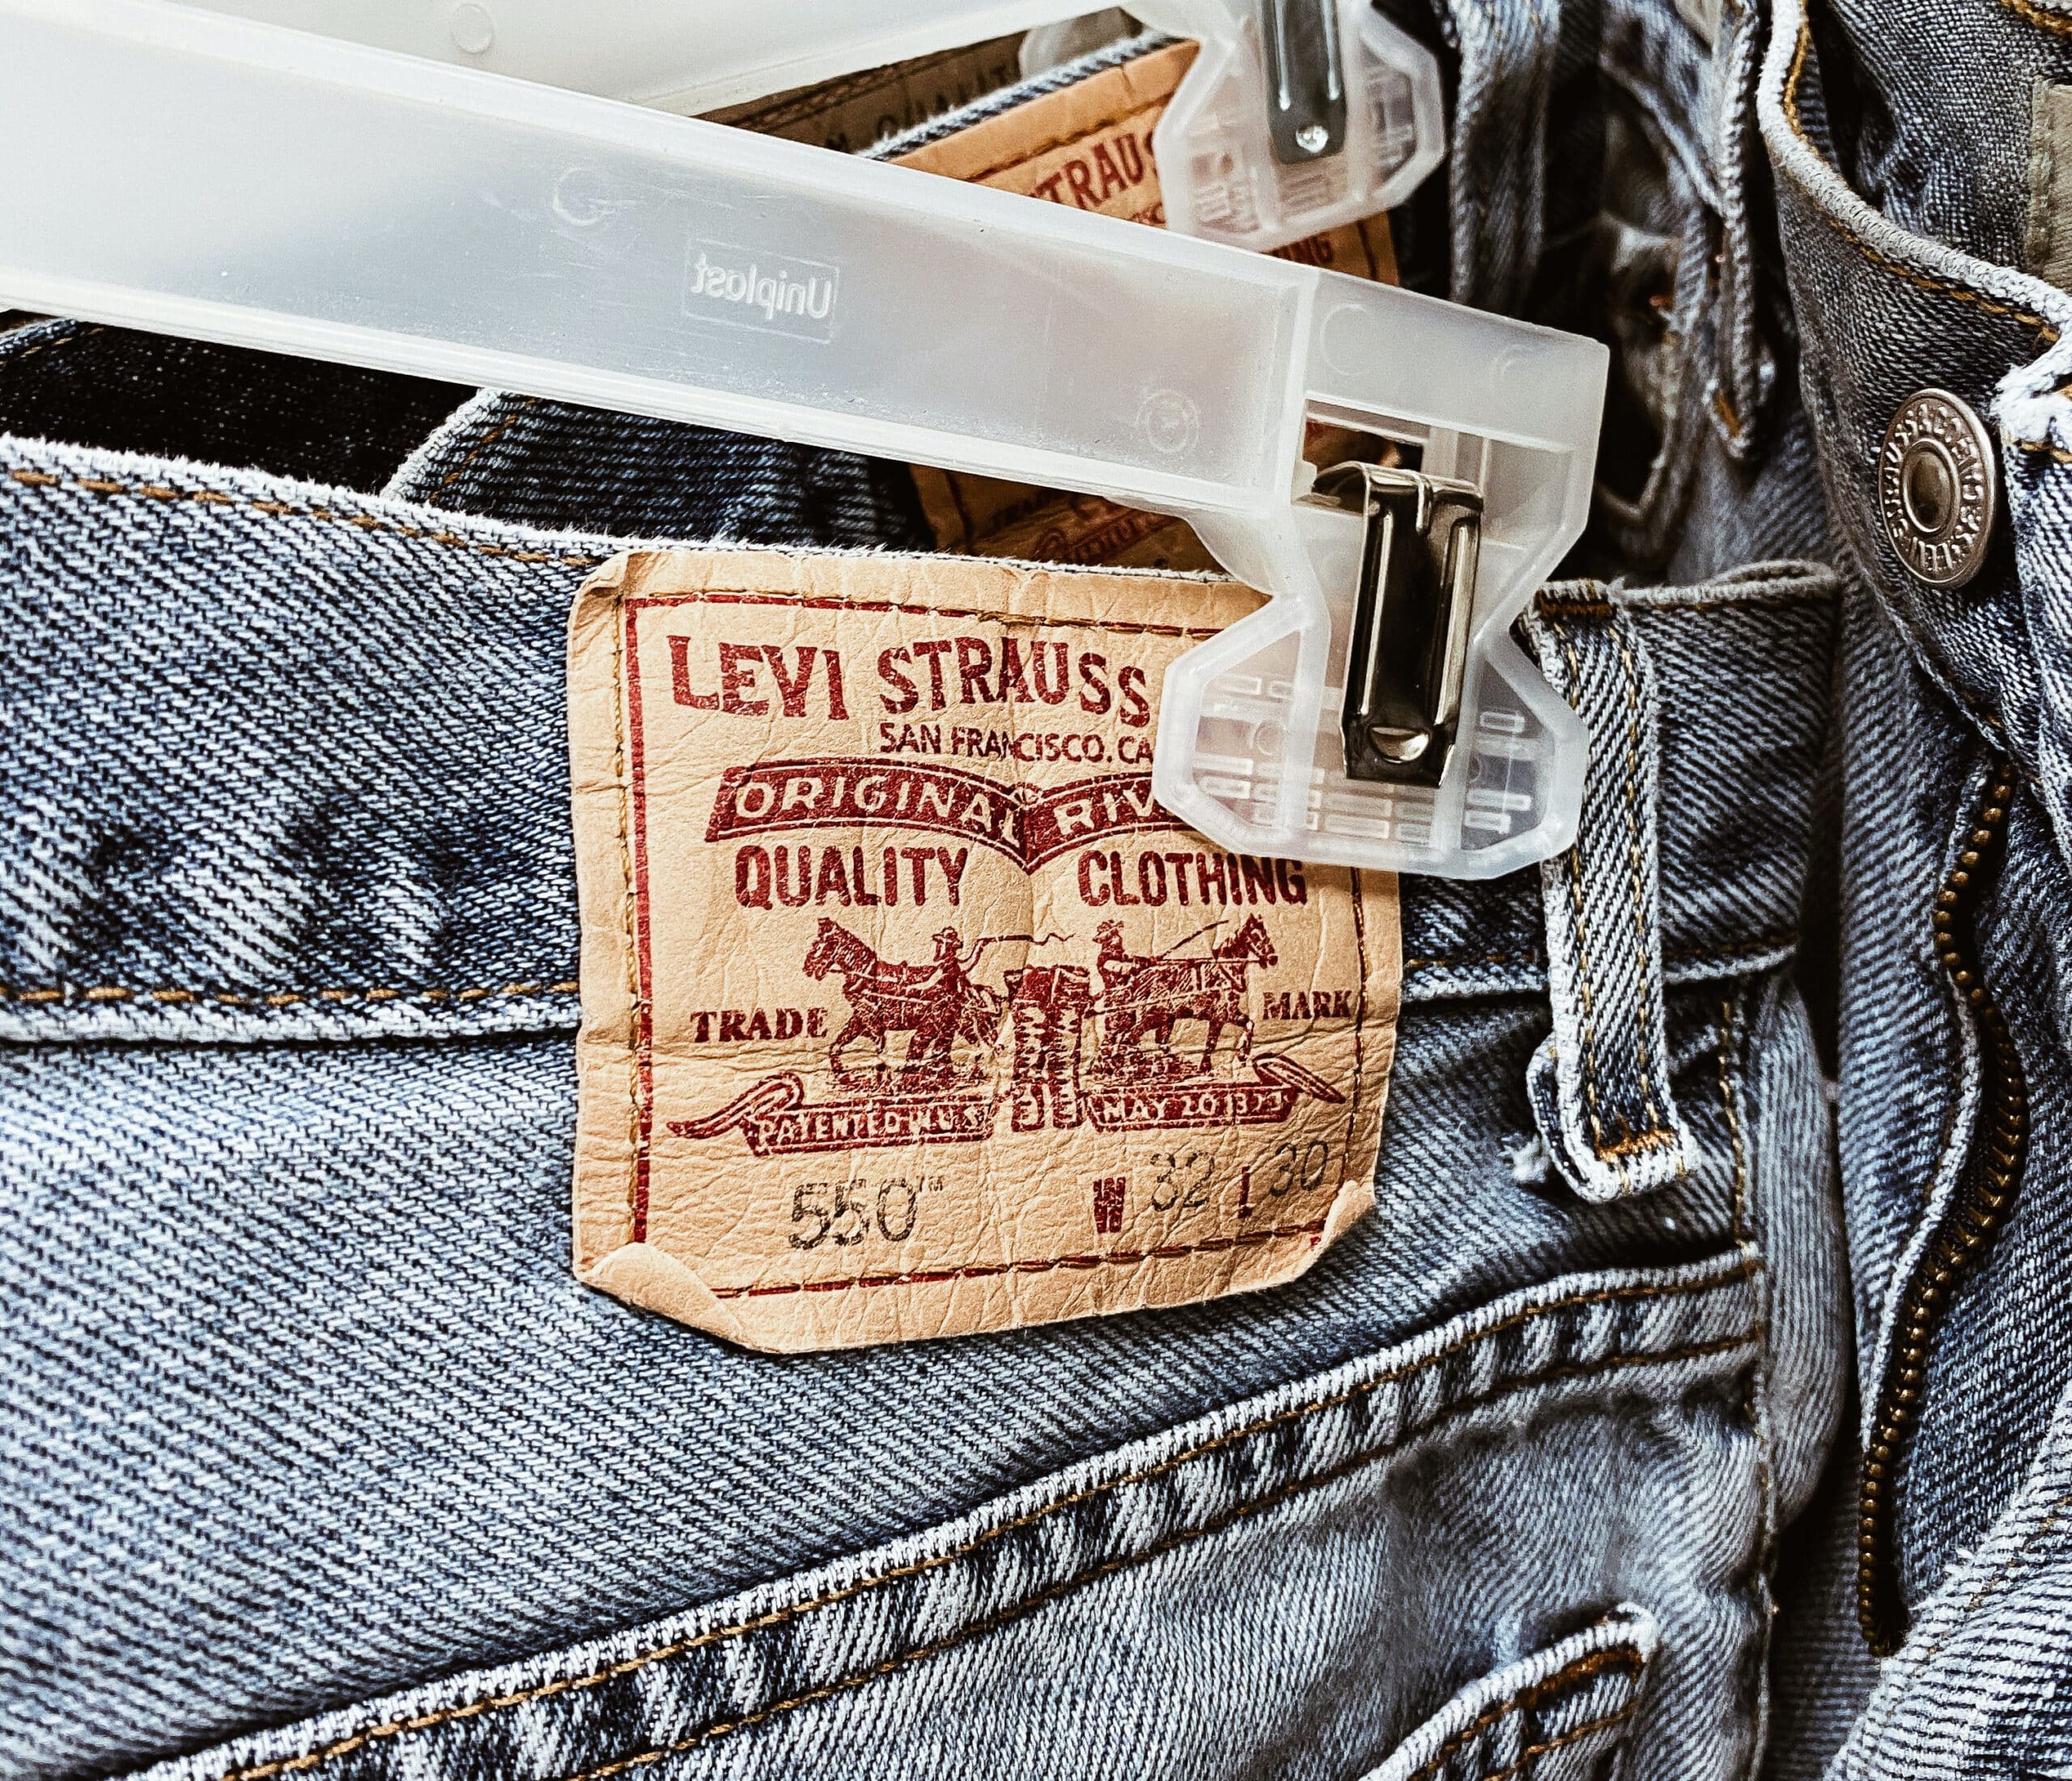 Waistband with a sewn-in Levi's label, a brand that successfully uses fashion storytelling